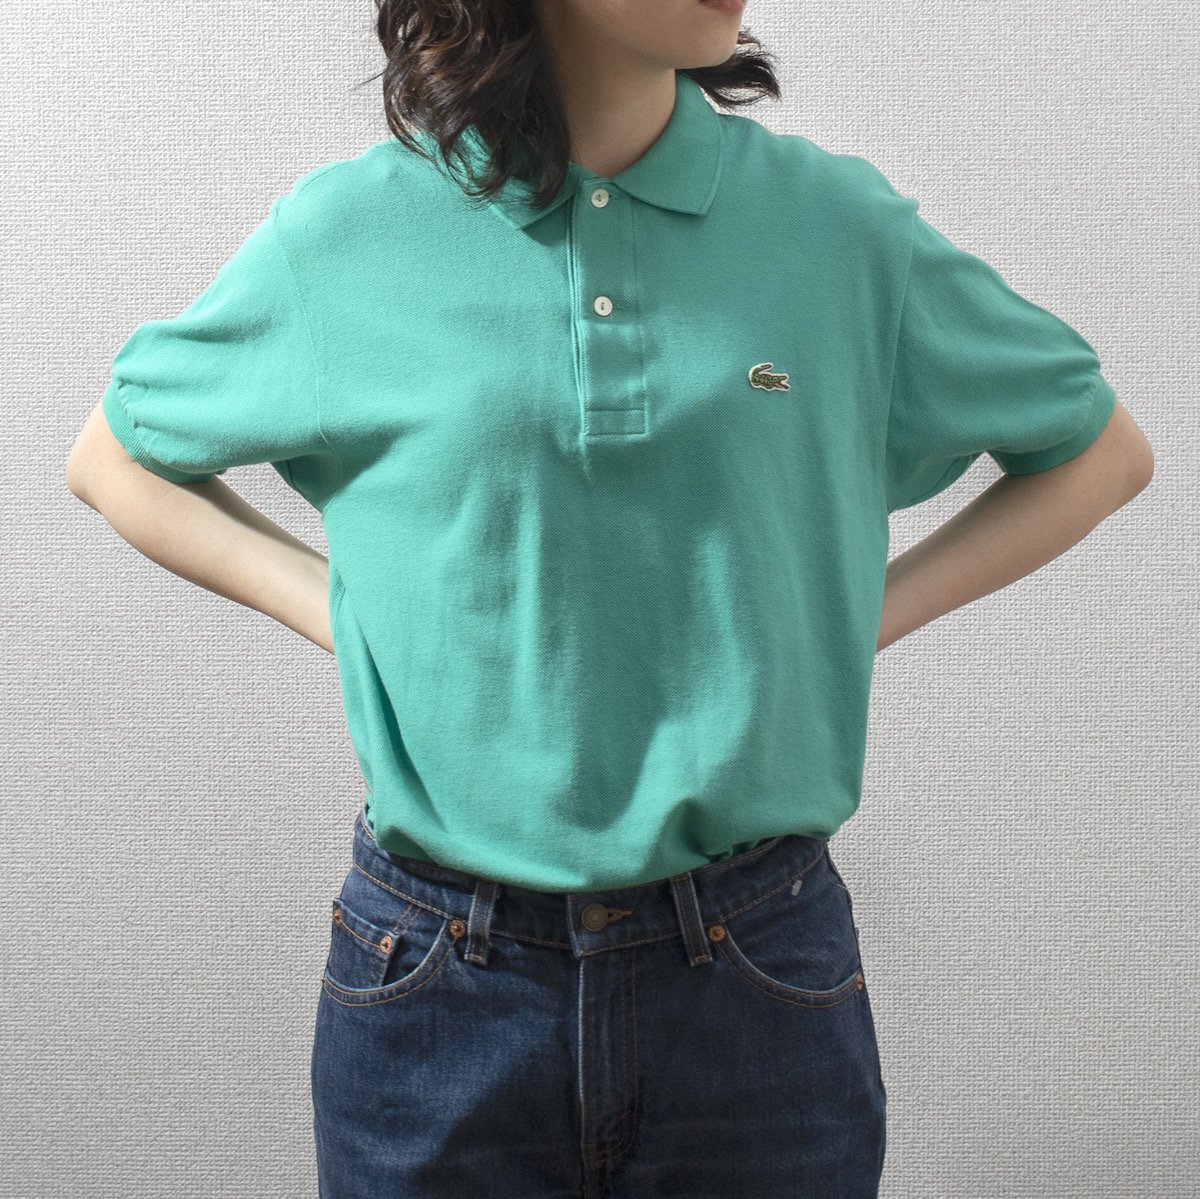 MadeinF【ヴィンテージ】90s LacosteポロシャツTiffany blueラコステ 